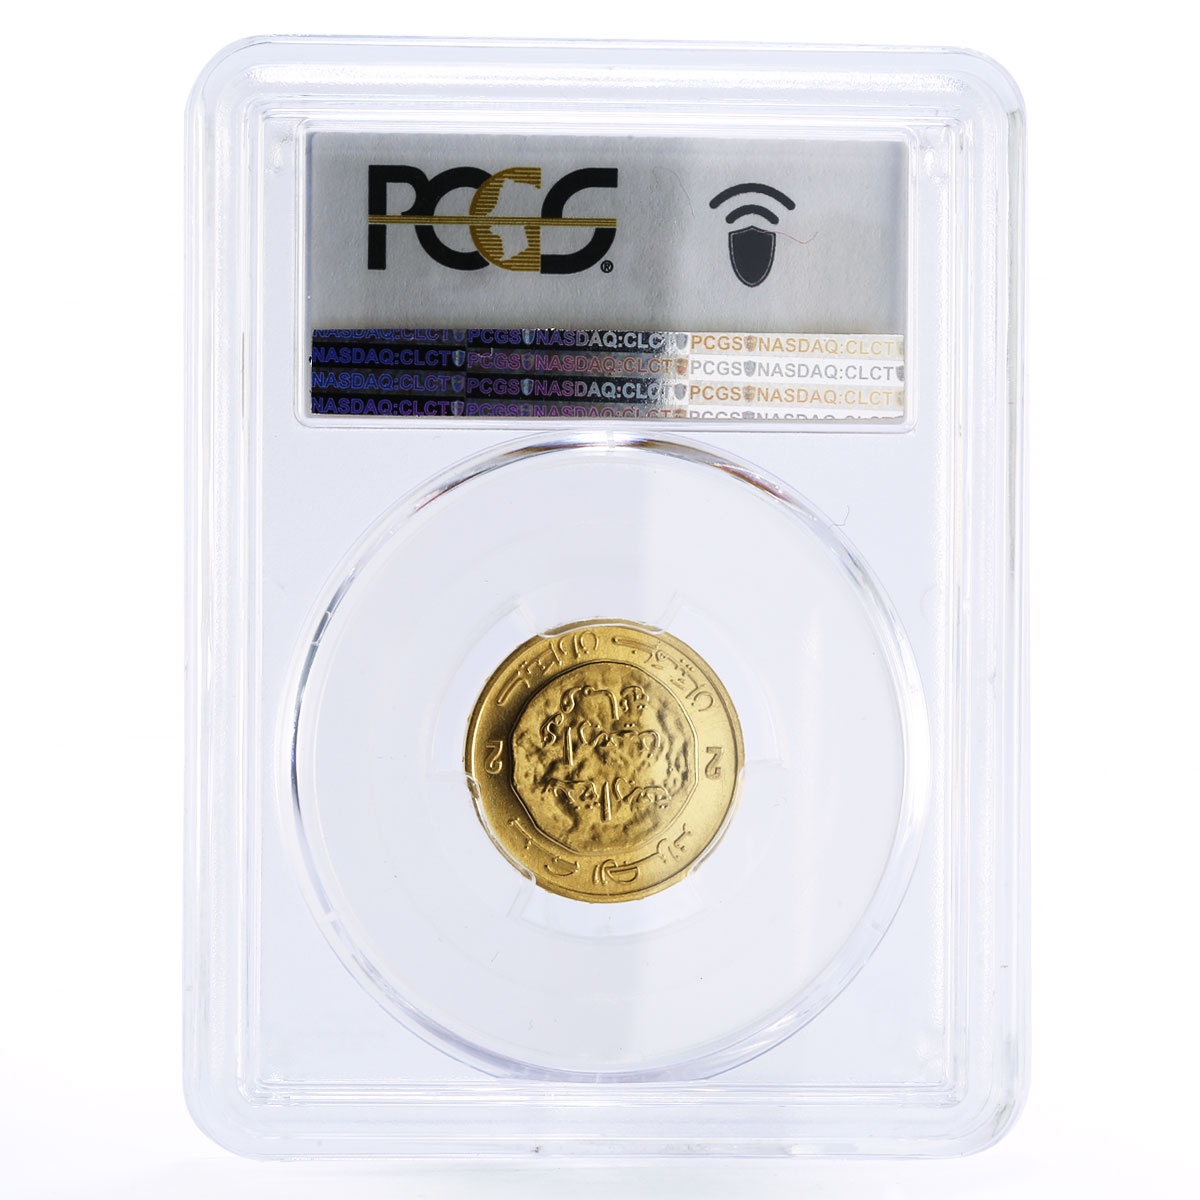 Algeria 2 dinars Rostomiden Dynasty Coinage MS69 PCGS gold coin 1991